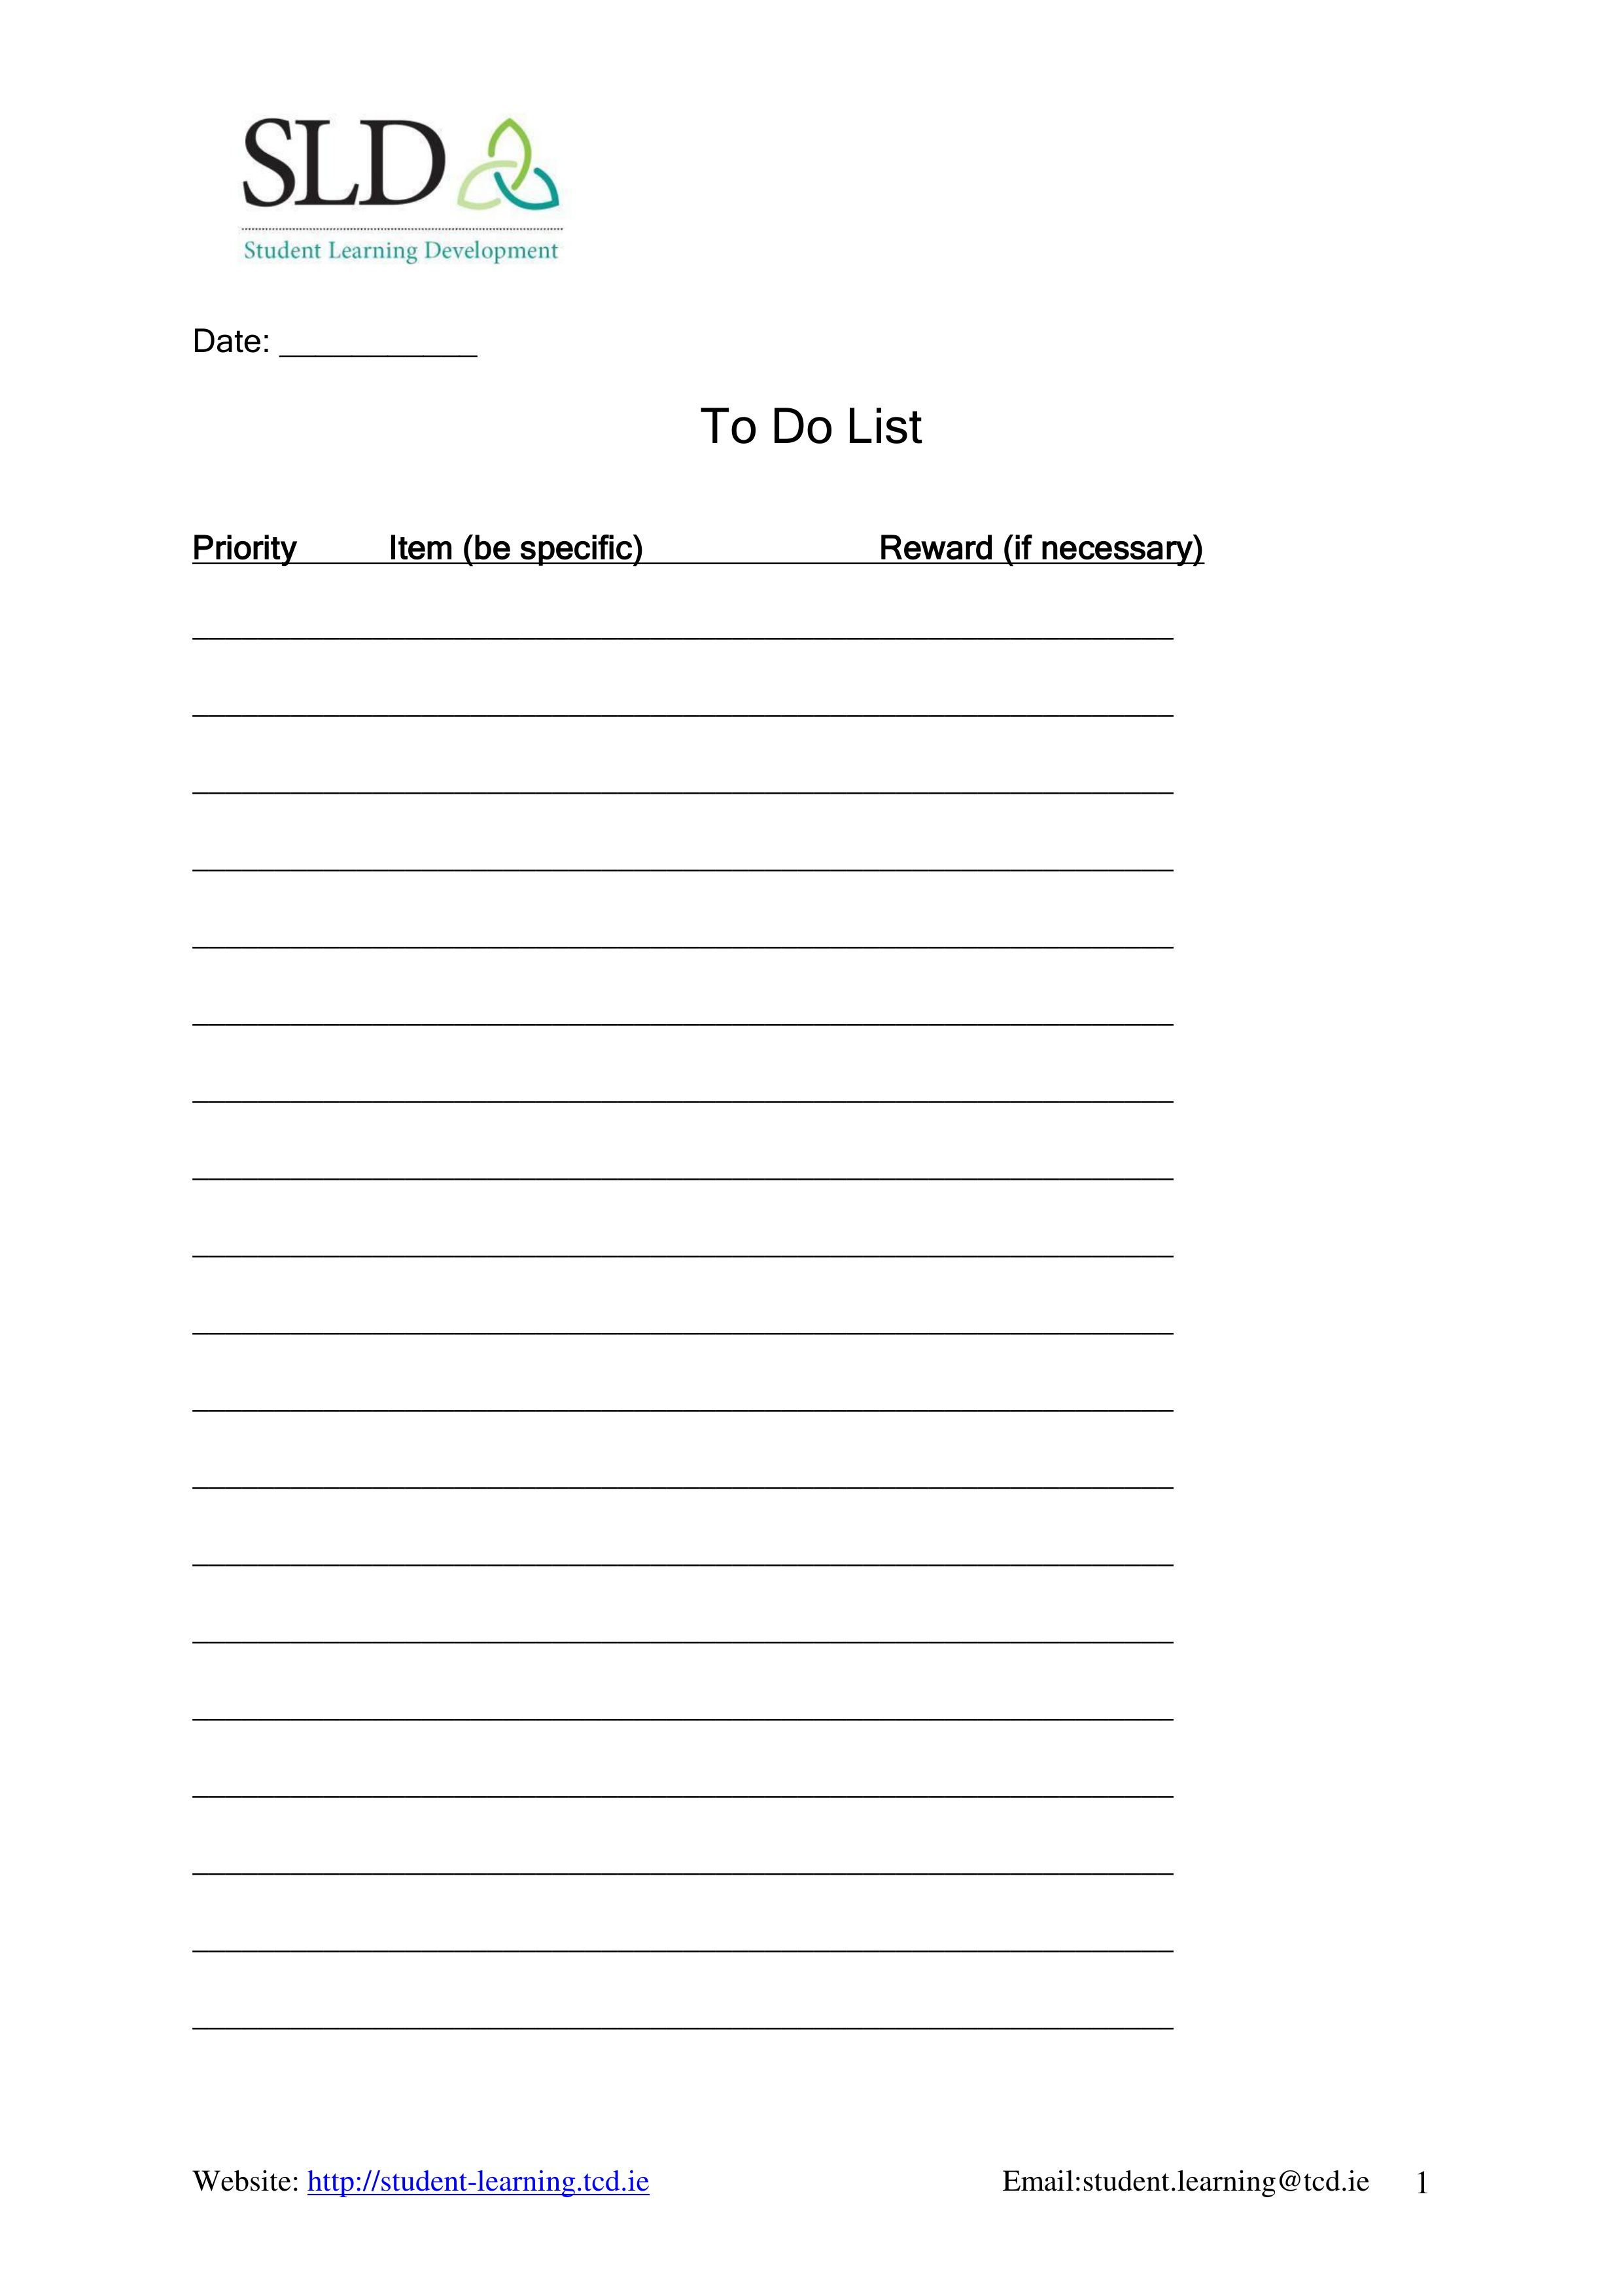 student learning development to do list